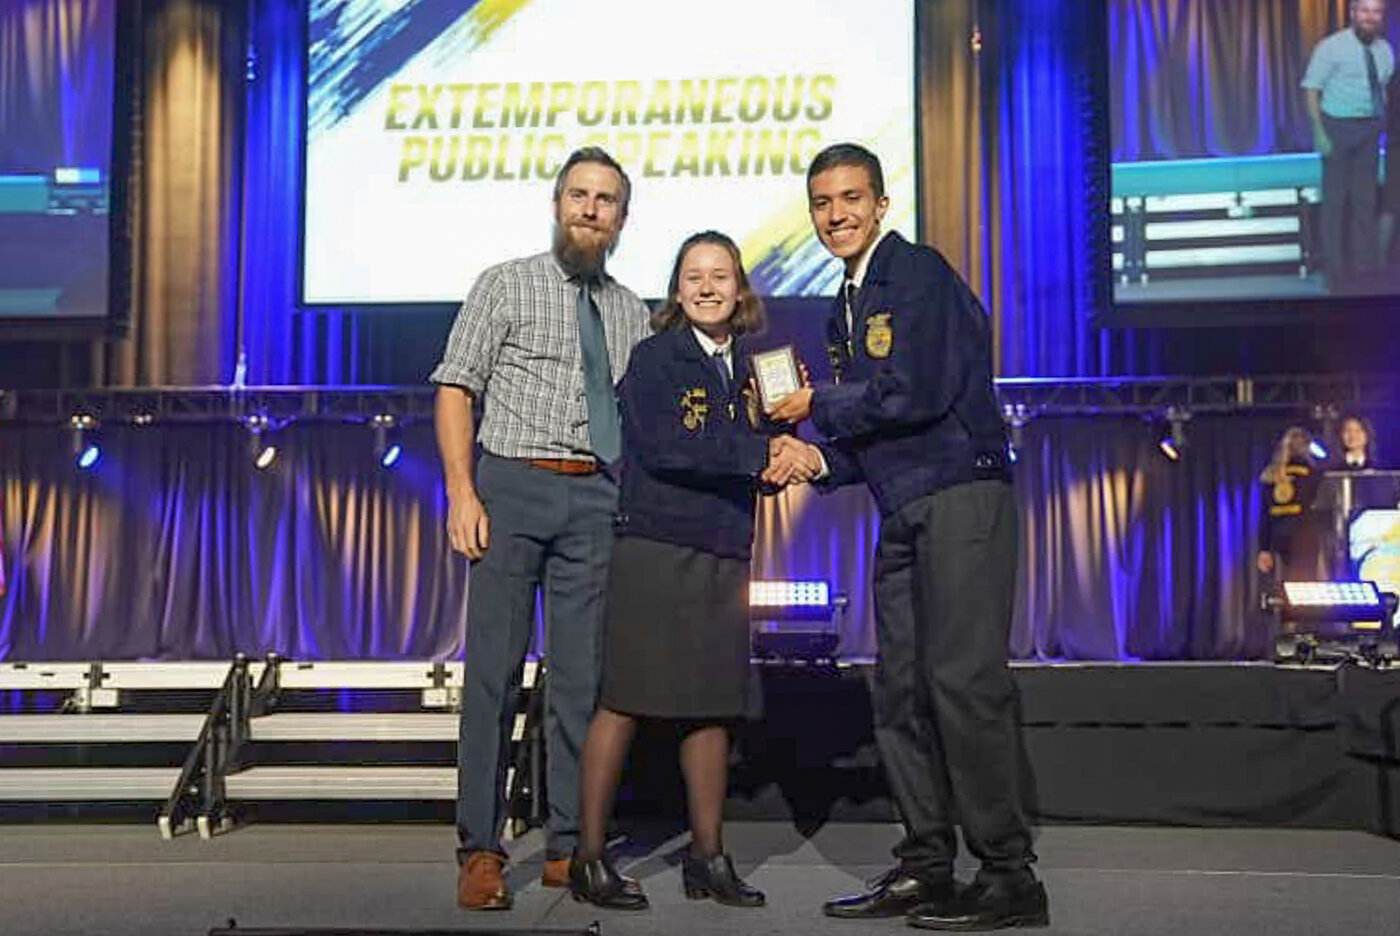 Ileana Wall, center, of the Yelm Future Farmers of America (FFA) chapter accepts her award for winning the 2023 Washington FFA state championship for extemporaneous speaker this past weekend in Kennewick. Photo courtesy of Washington FFA Association.